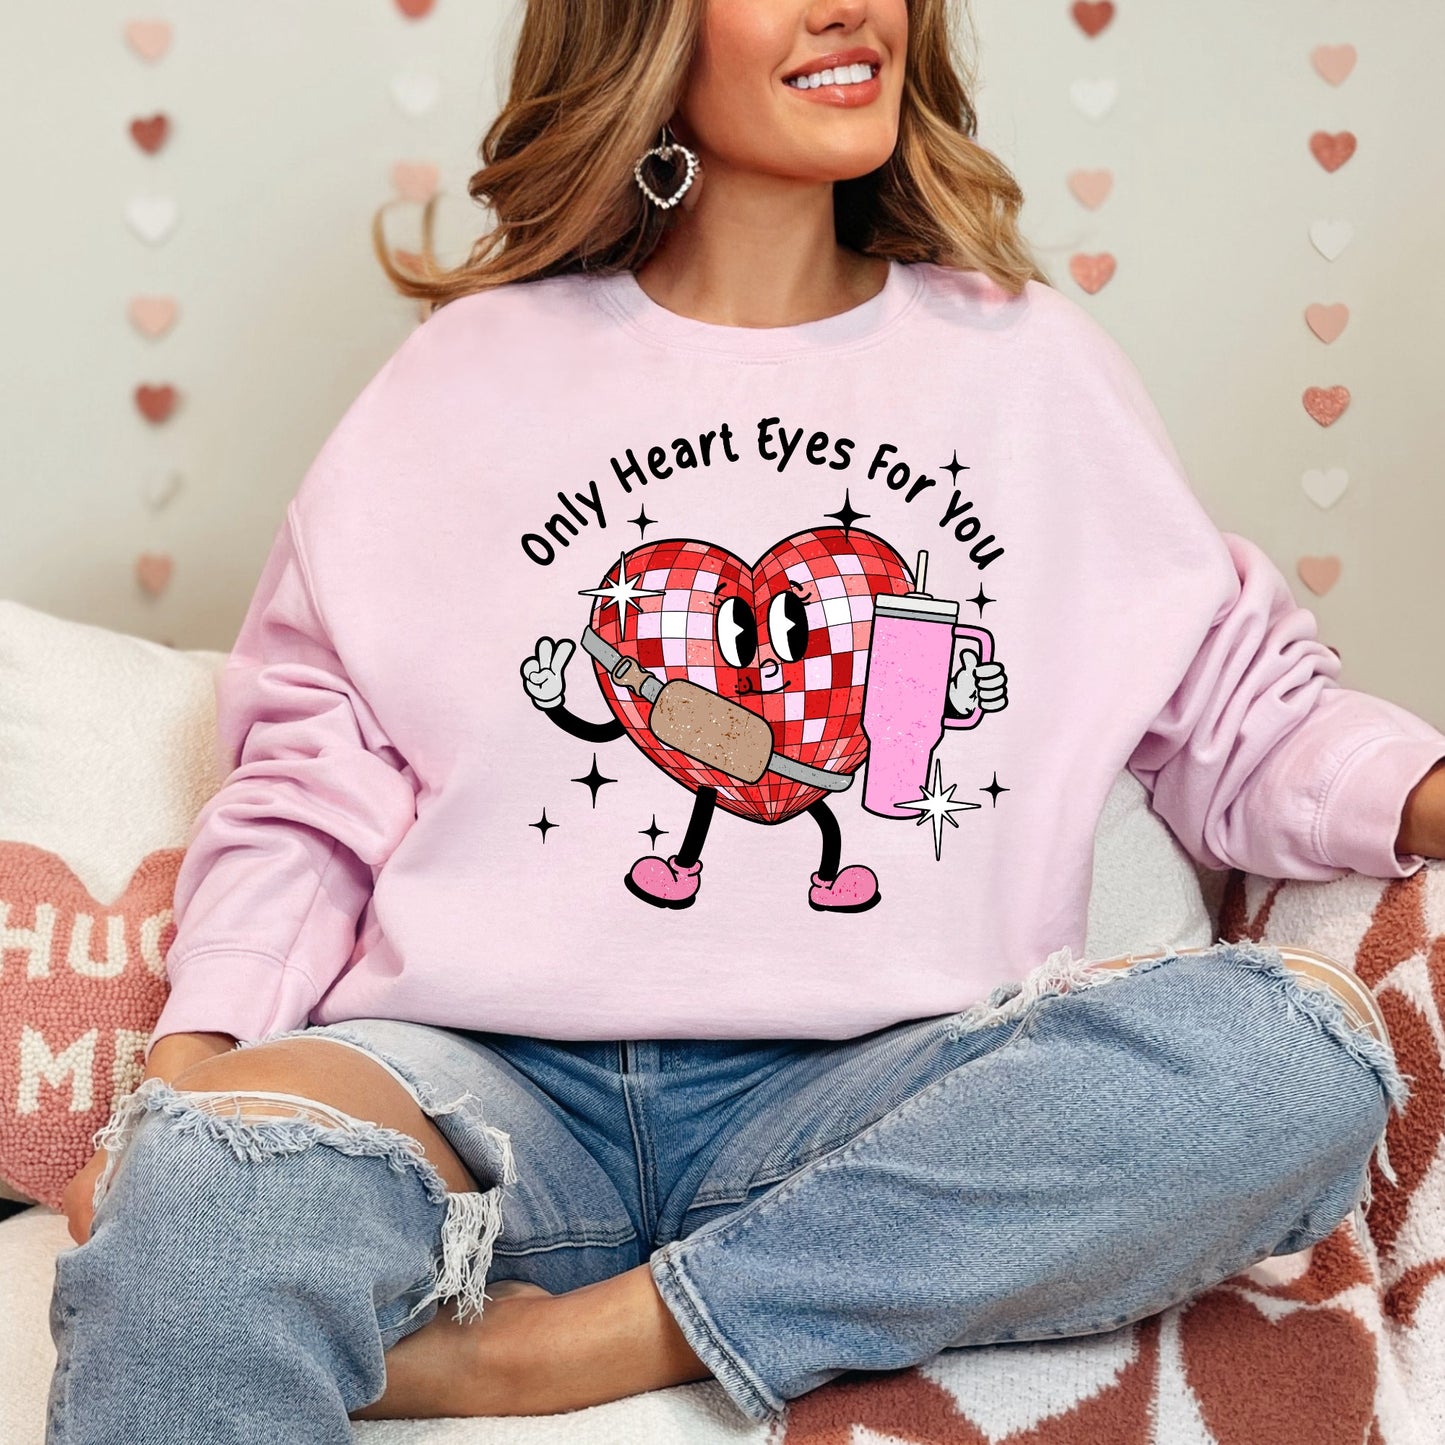 Only Heart Eyes For You Sweatshirt-2 COLORS